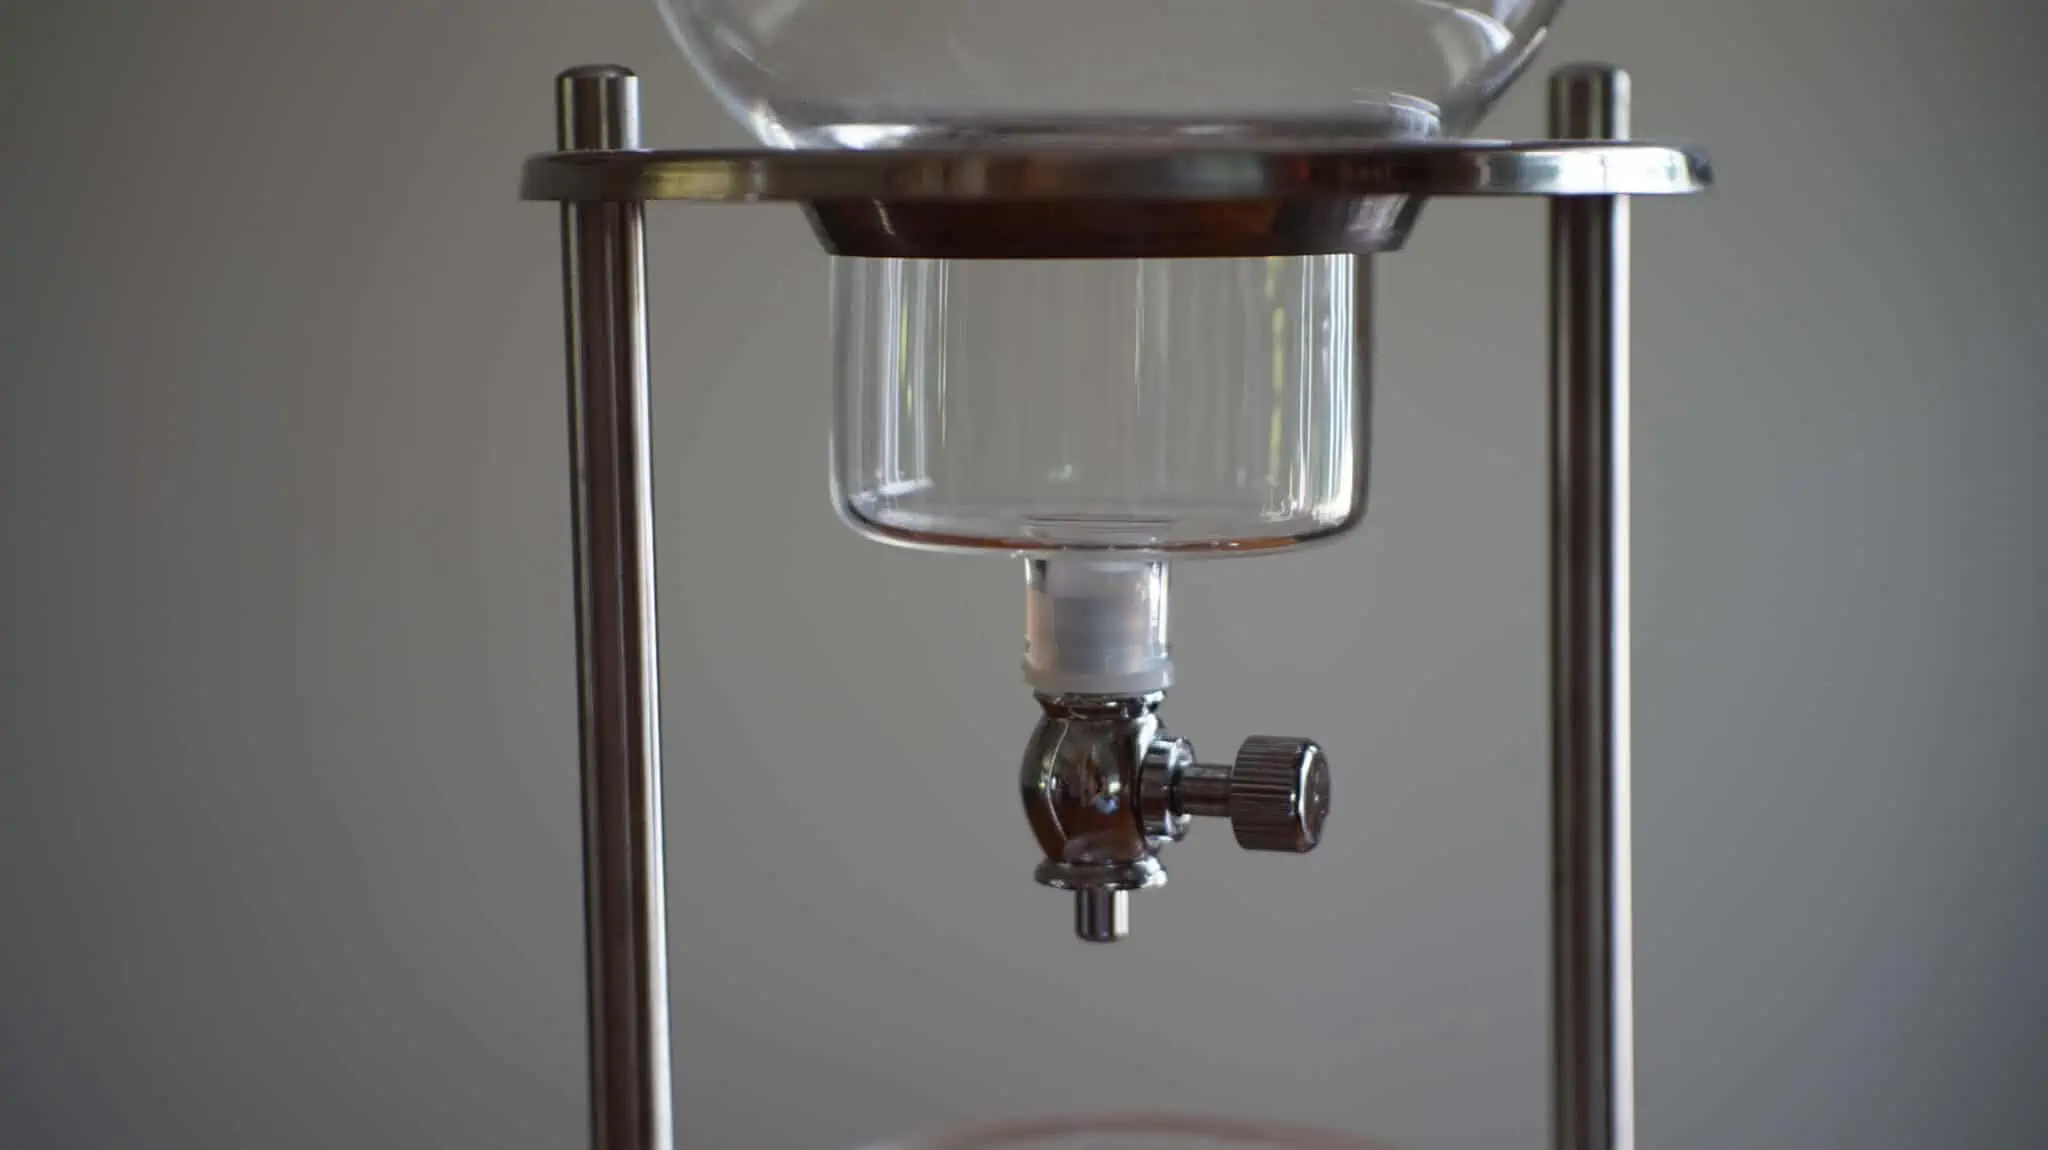 Yama Glass Cold Drip Coffee Maker Review: My Honest Thoughts (+Is It For  YOU?) 2022